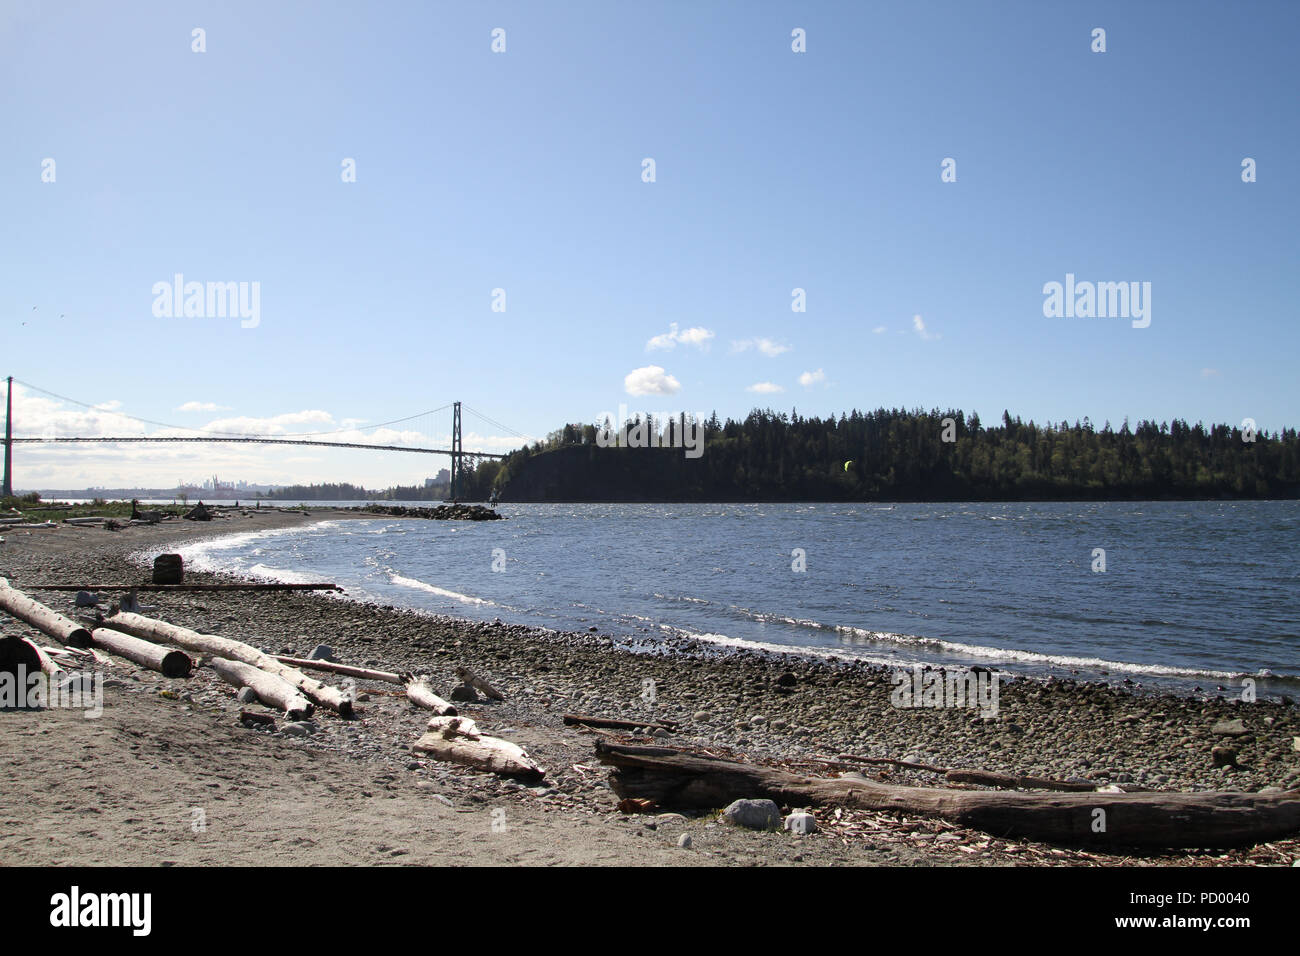 A beach on the edge of a bay looking across the water to a treed land mass.  There are logs and driftwood located on the beach. Stock Photo